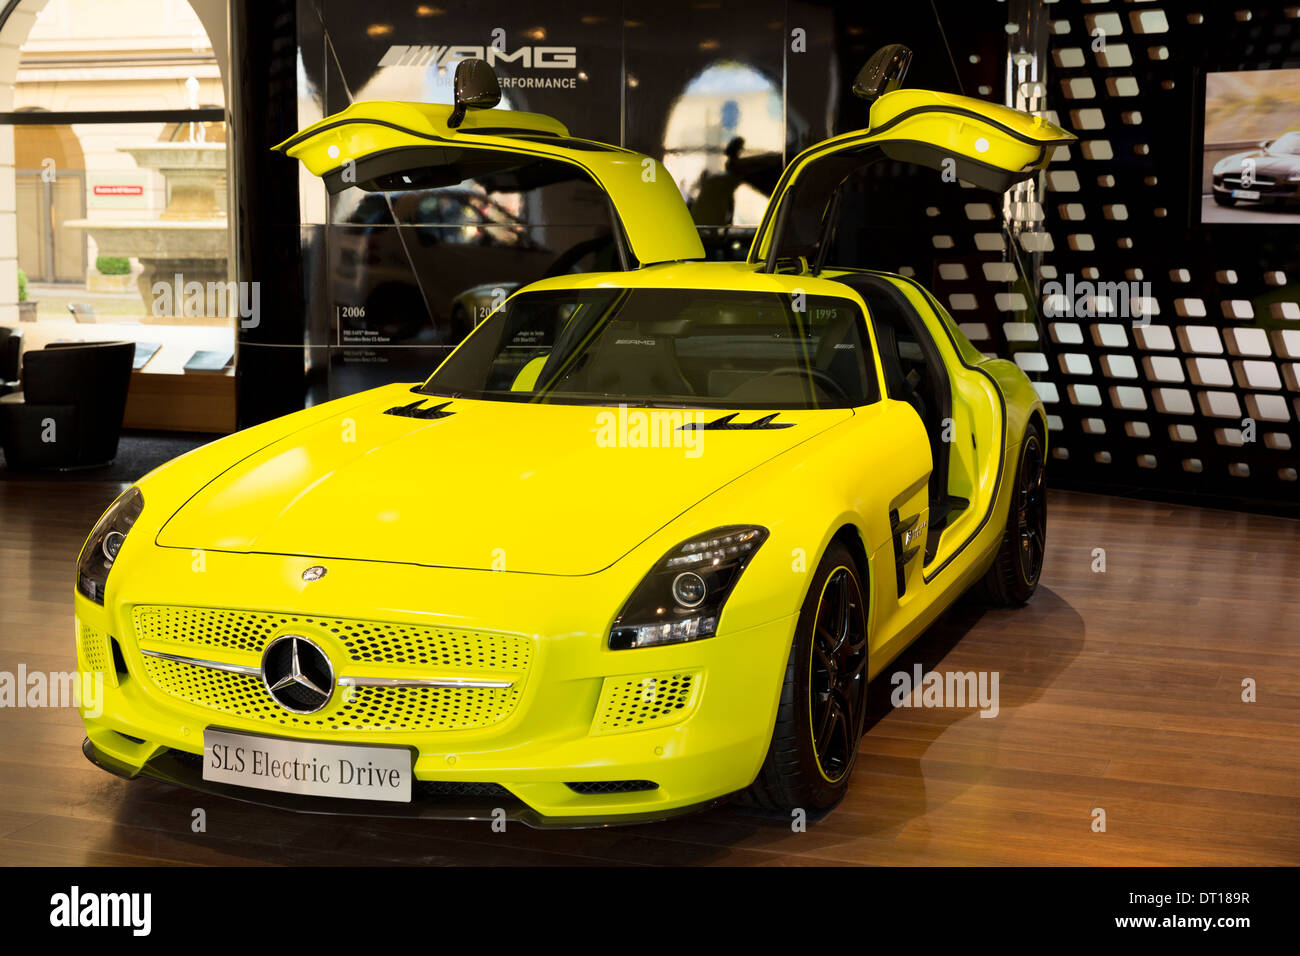 AMG SLS Coupe Electric Drive motor car on display at AMG Mercedes gallery showroom in Odeonsplatz, Munich, Bavaria, Germany Stock Photo